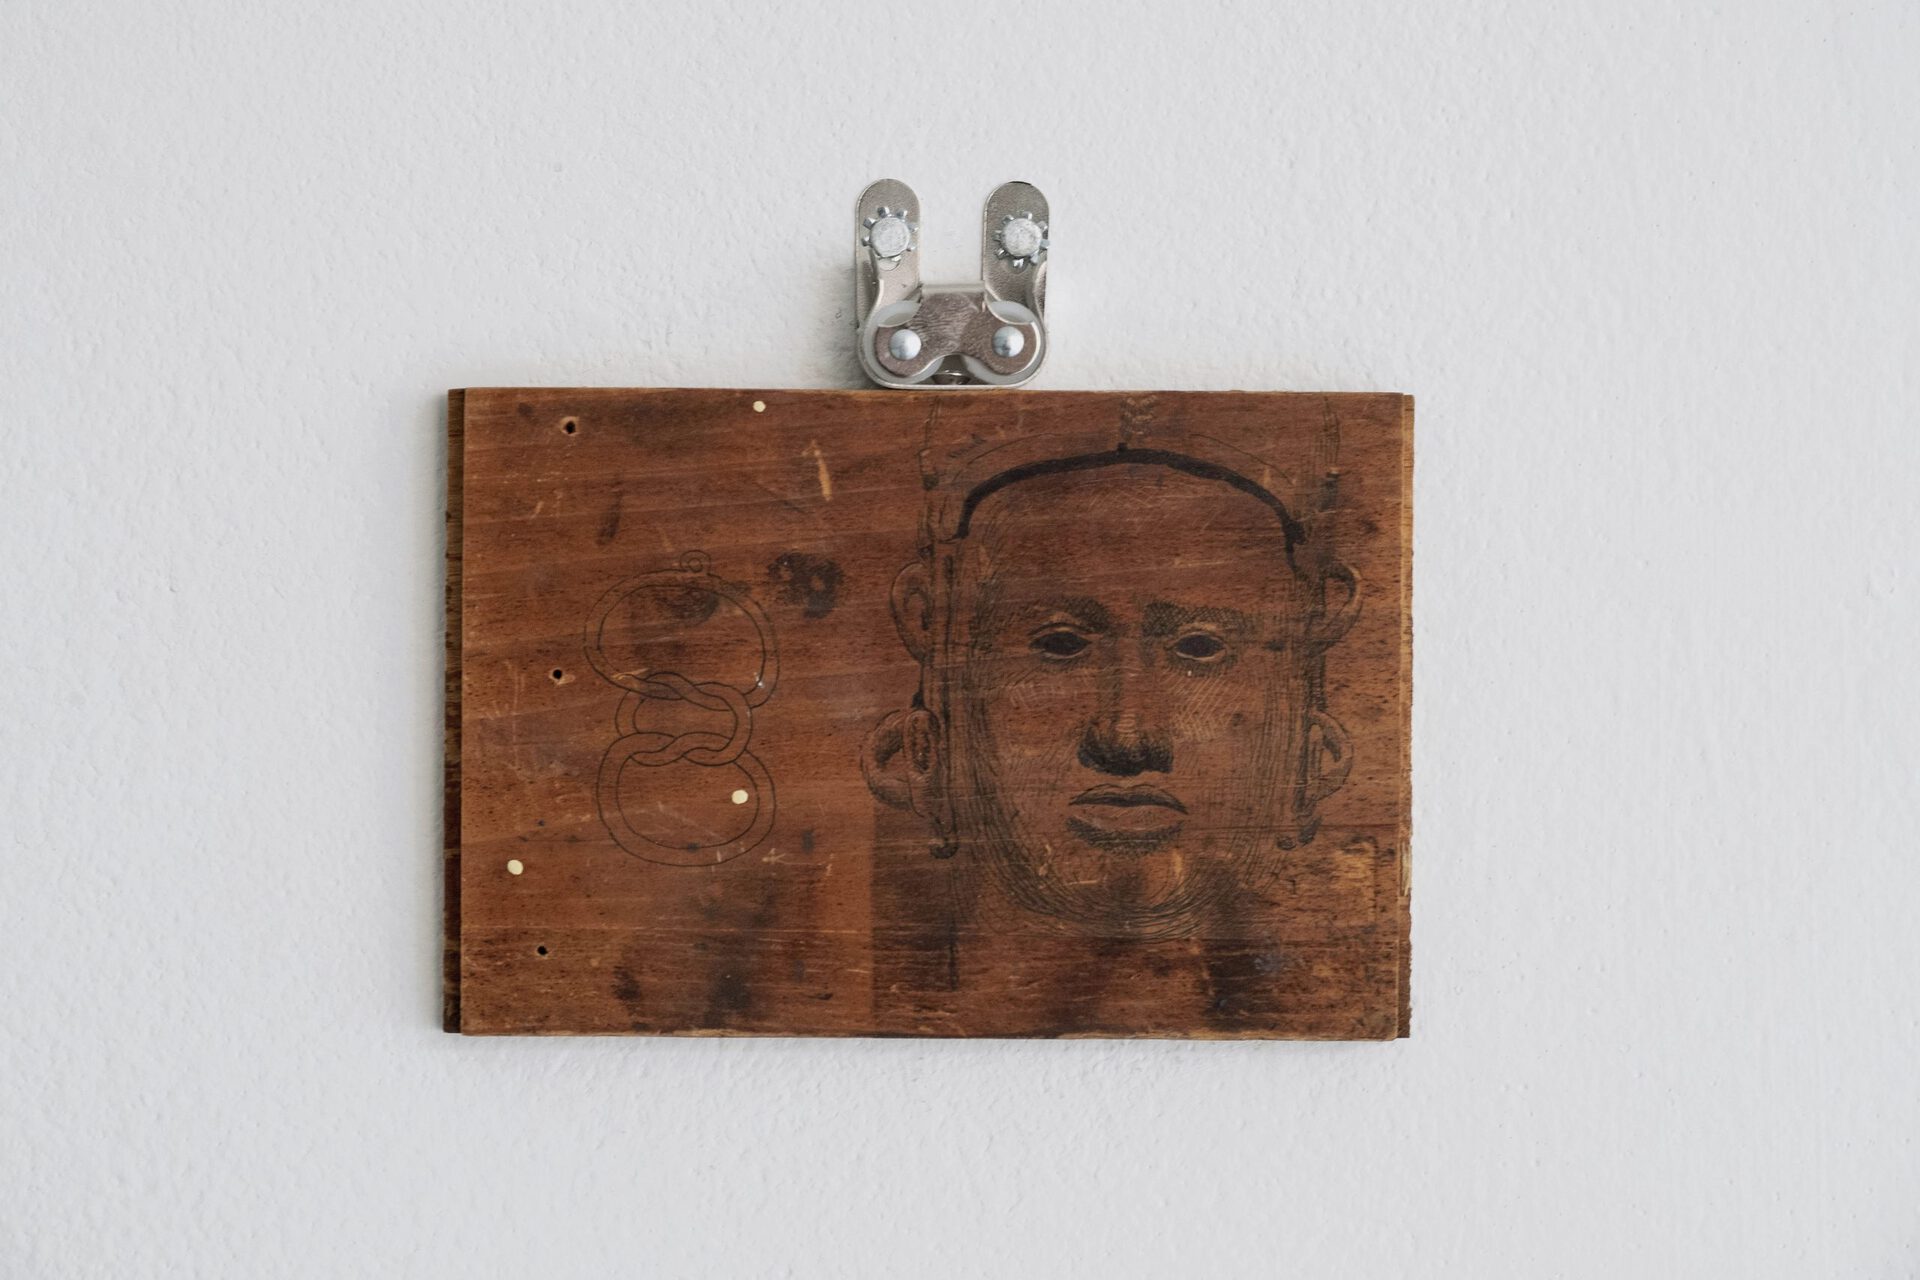 Jerome Sicard, Untitled, 2022, Ink on carved wood, hardware, 5.5” x 4.5”.